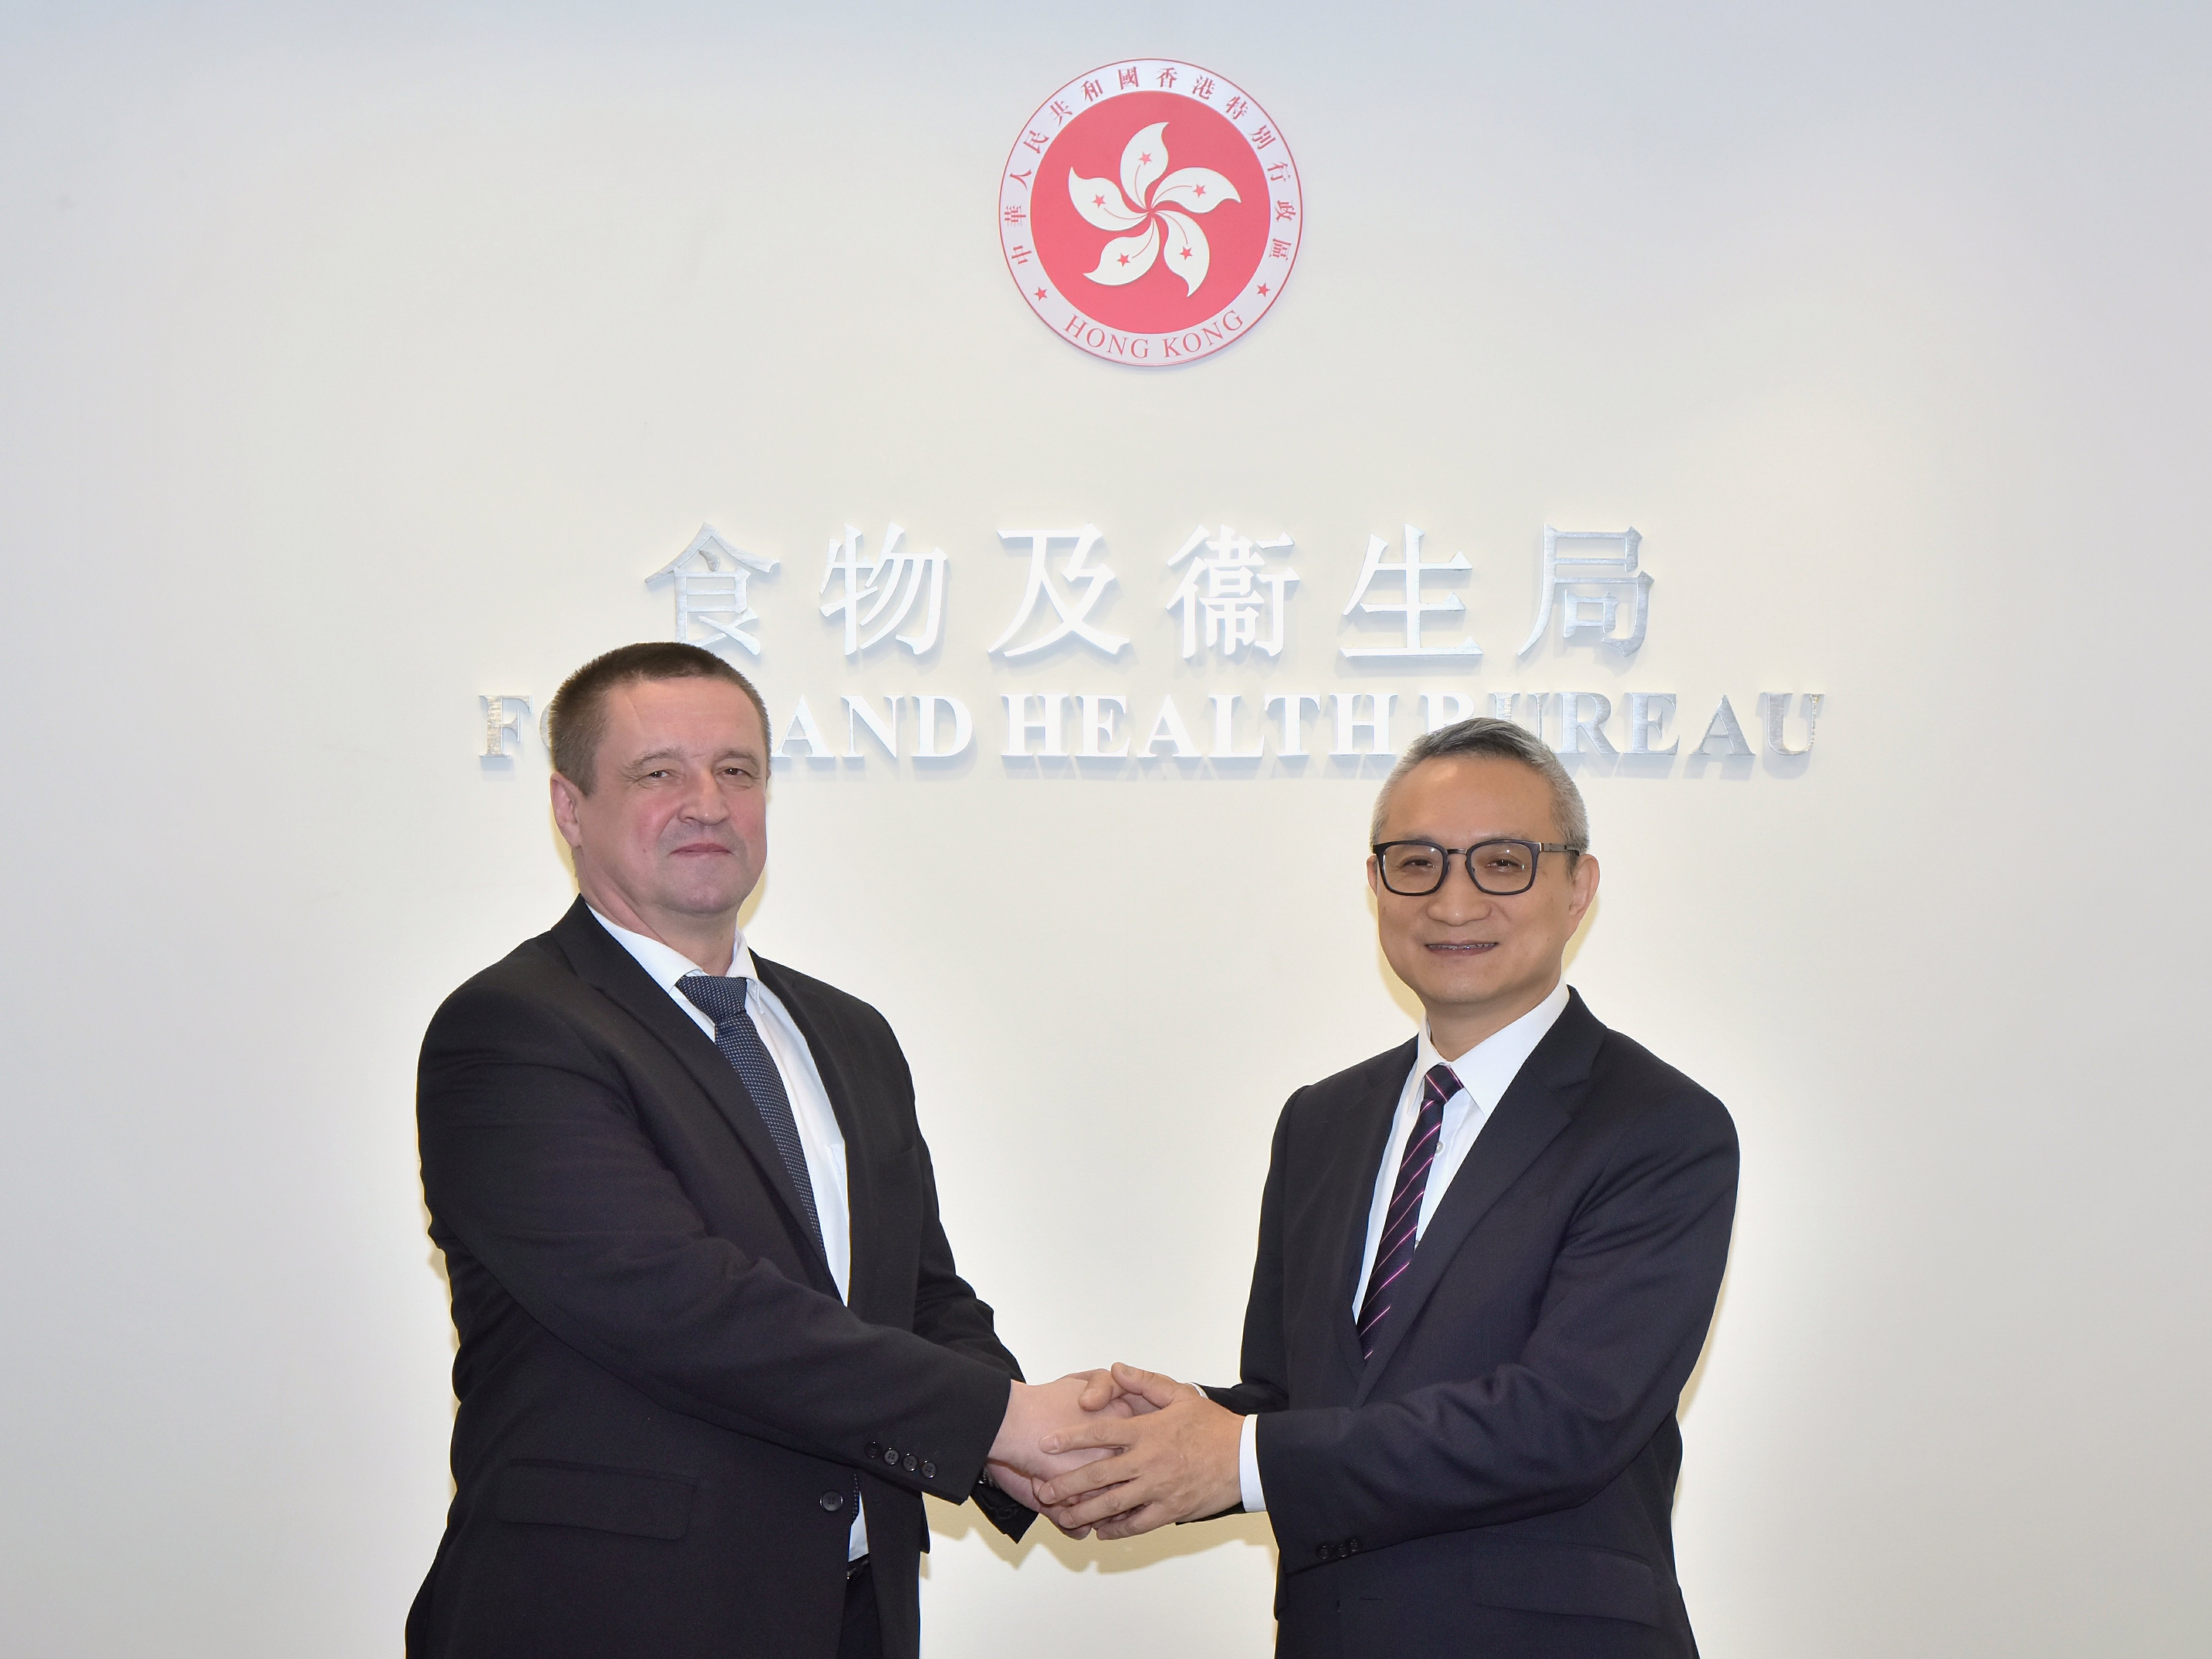 The Under Secretary for Food and Health, Dr Chui Tak-yi (right), meets the Minister of Agriculture and Food of the Republic of Belarus, Mr Leonid Zayac, at the Central Government Offices today (December 14) to discuss issues of mutual concern.